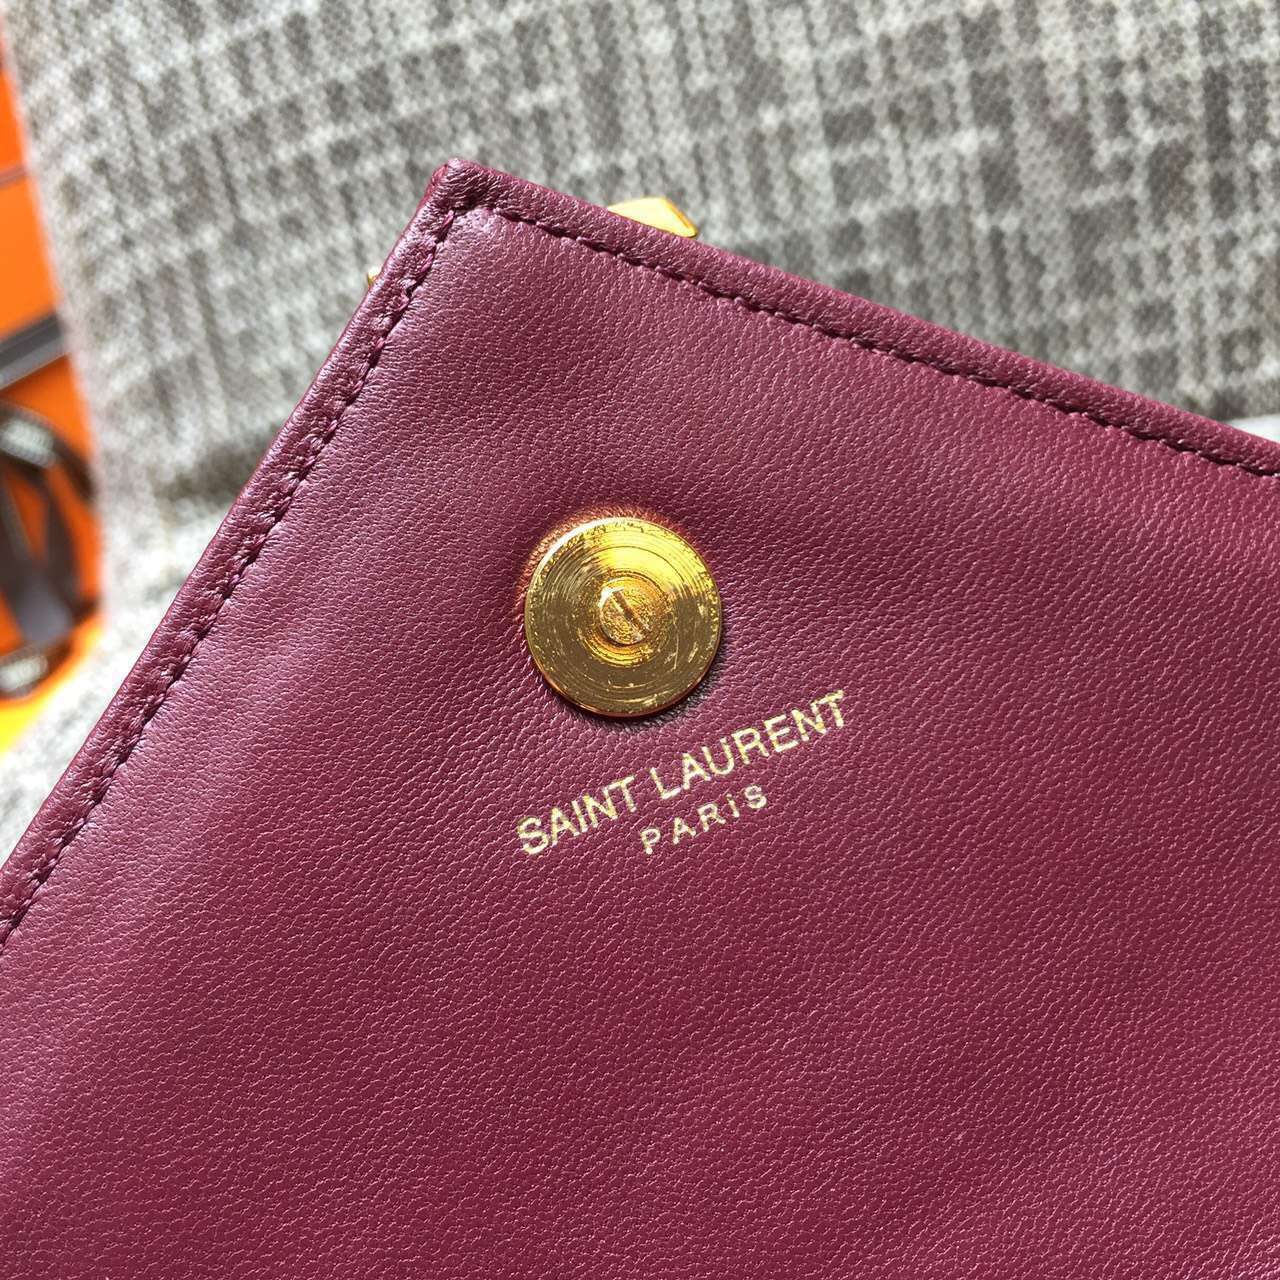 2015 Cheap YSL Out Sale with Free Shipping-Saint Laurent Classic Baby Monogram Satchel in Oxblood Matelasse Leather with Gold Hardware - Click Image to Close